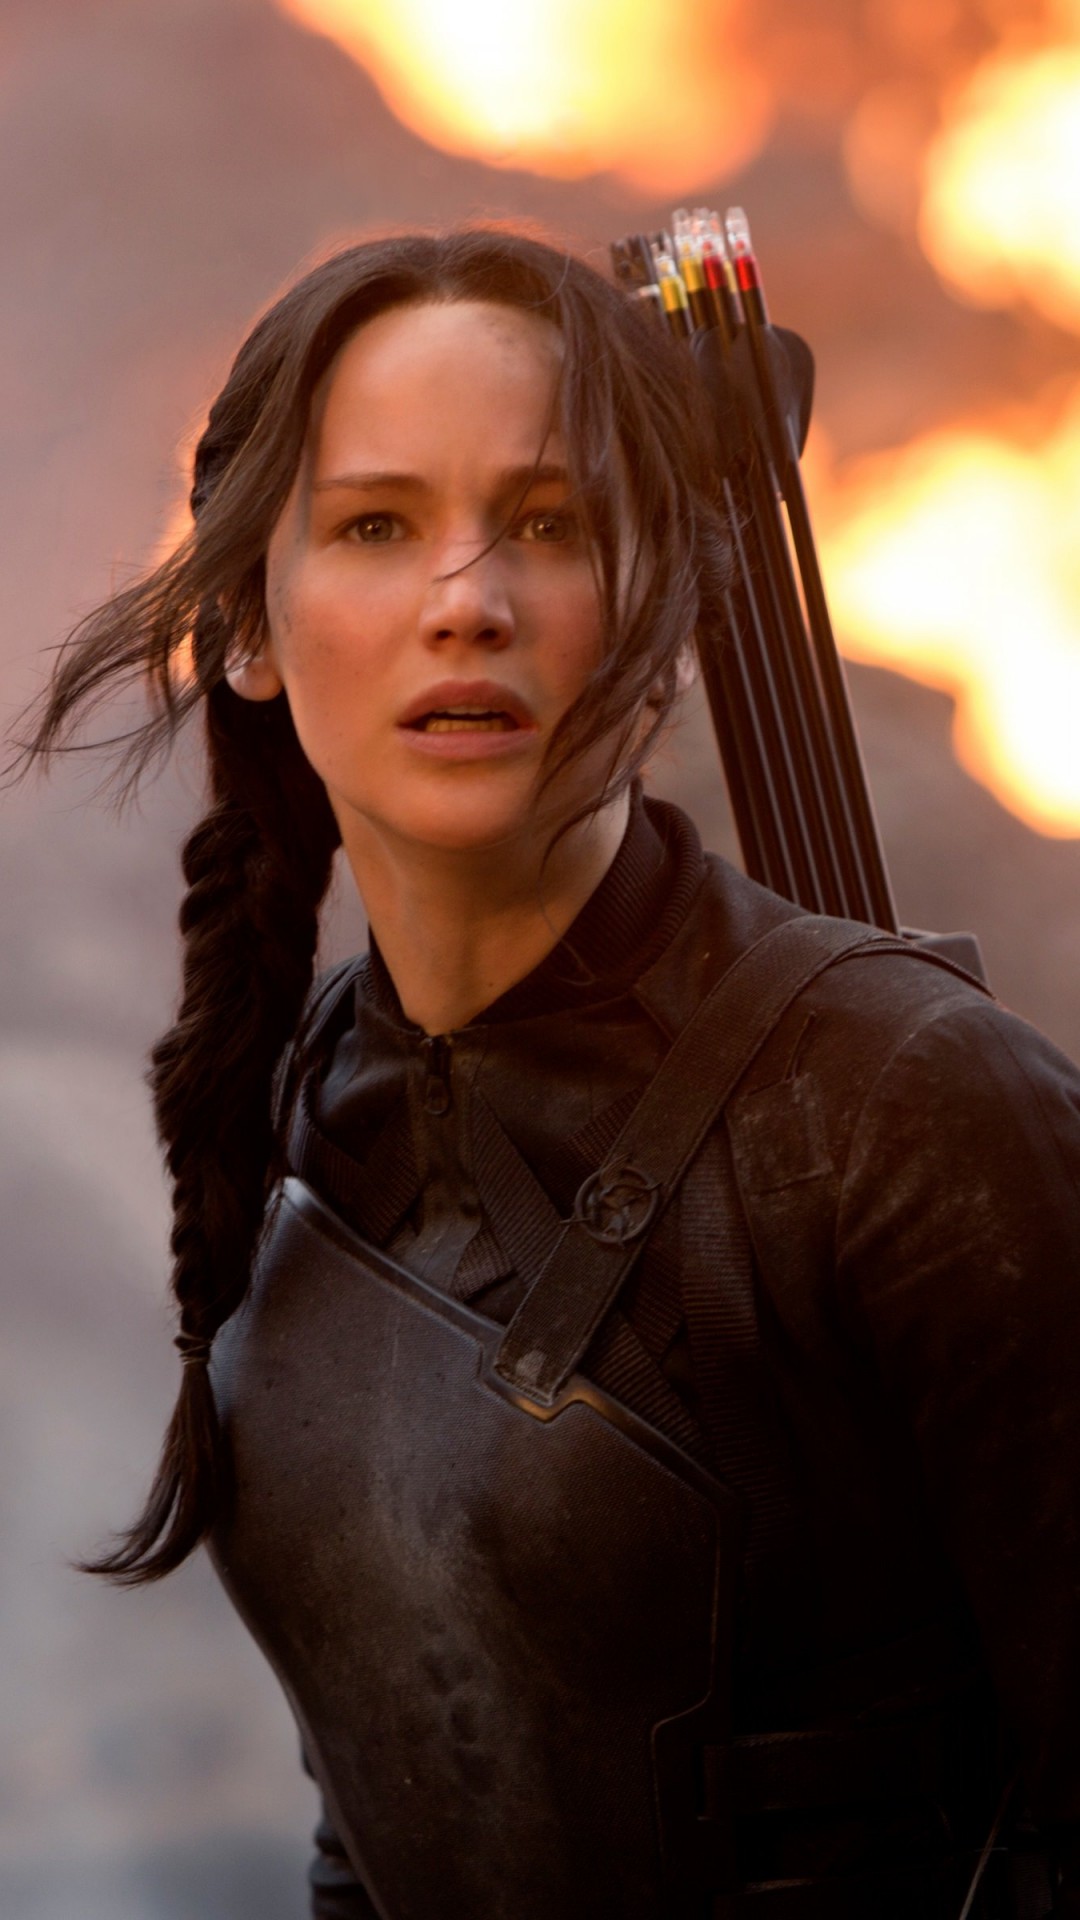 Jennifer Lawrence in The Hunger Games Wallpaper for SAMSUNG Galaxy S4